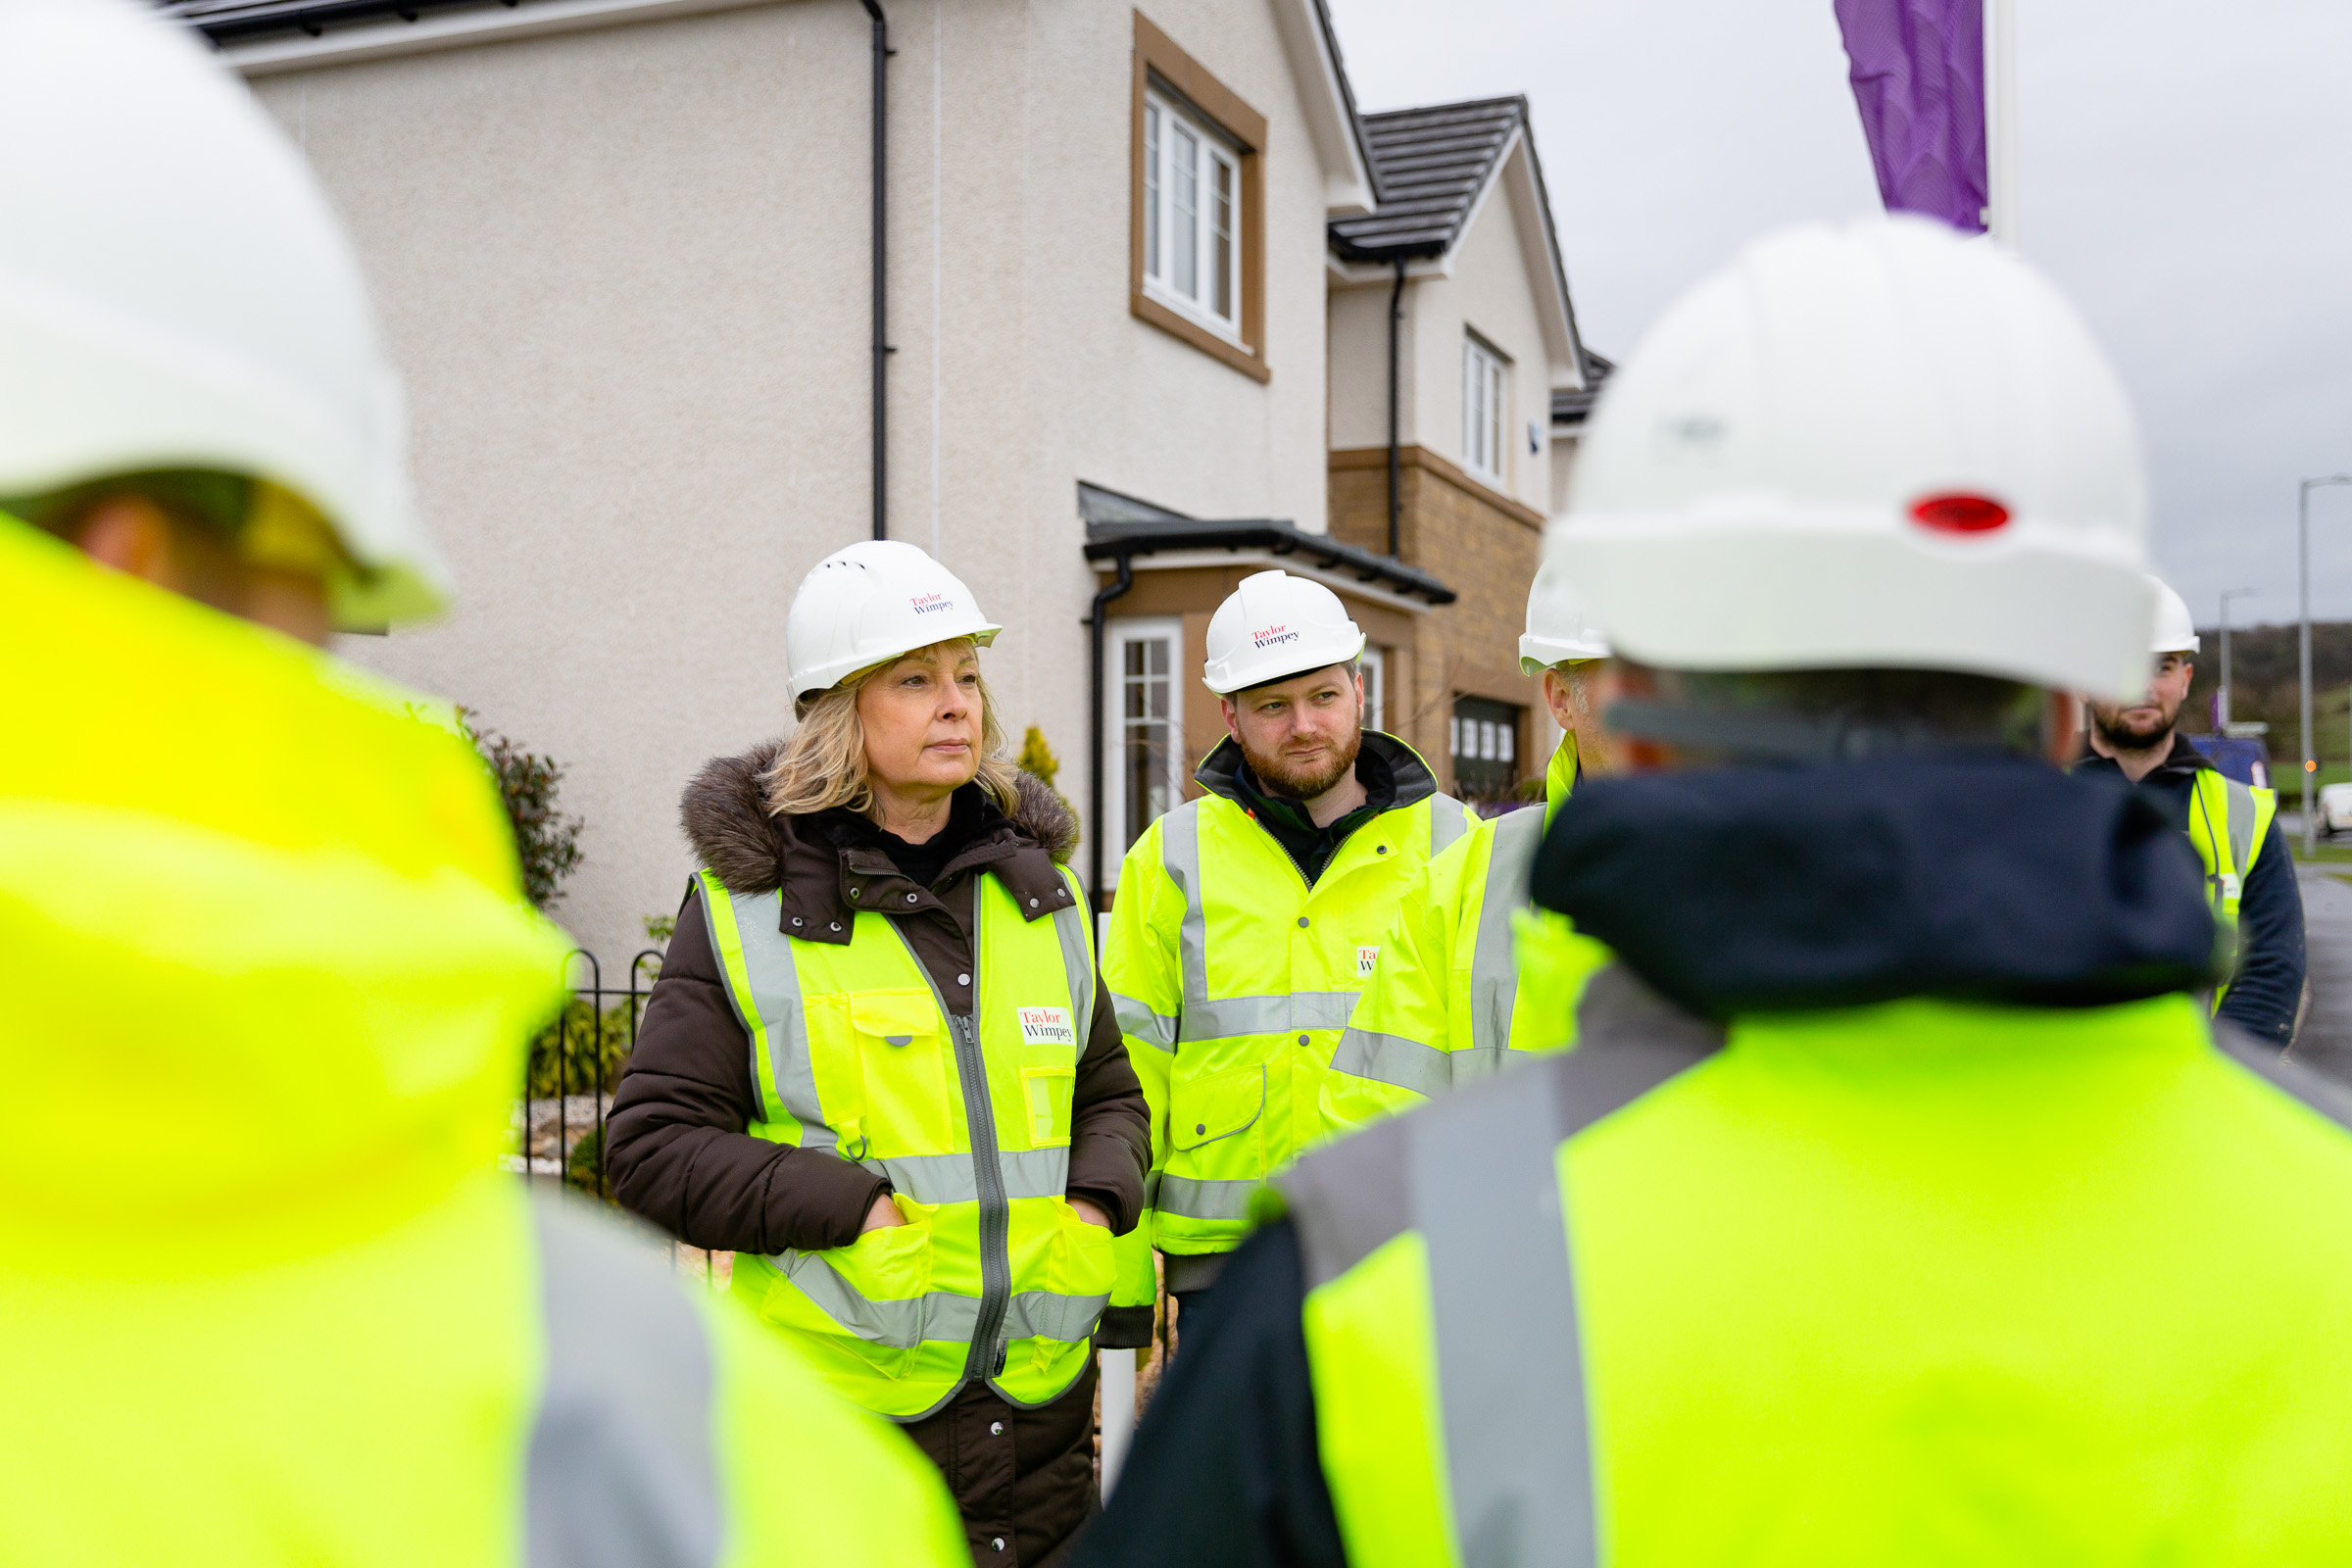 Scottish Apprentice Week sees young Scots eager to secure their place in the housebuilding industry